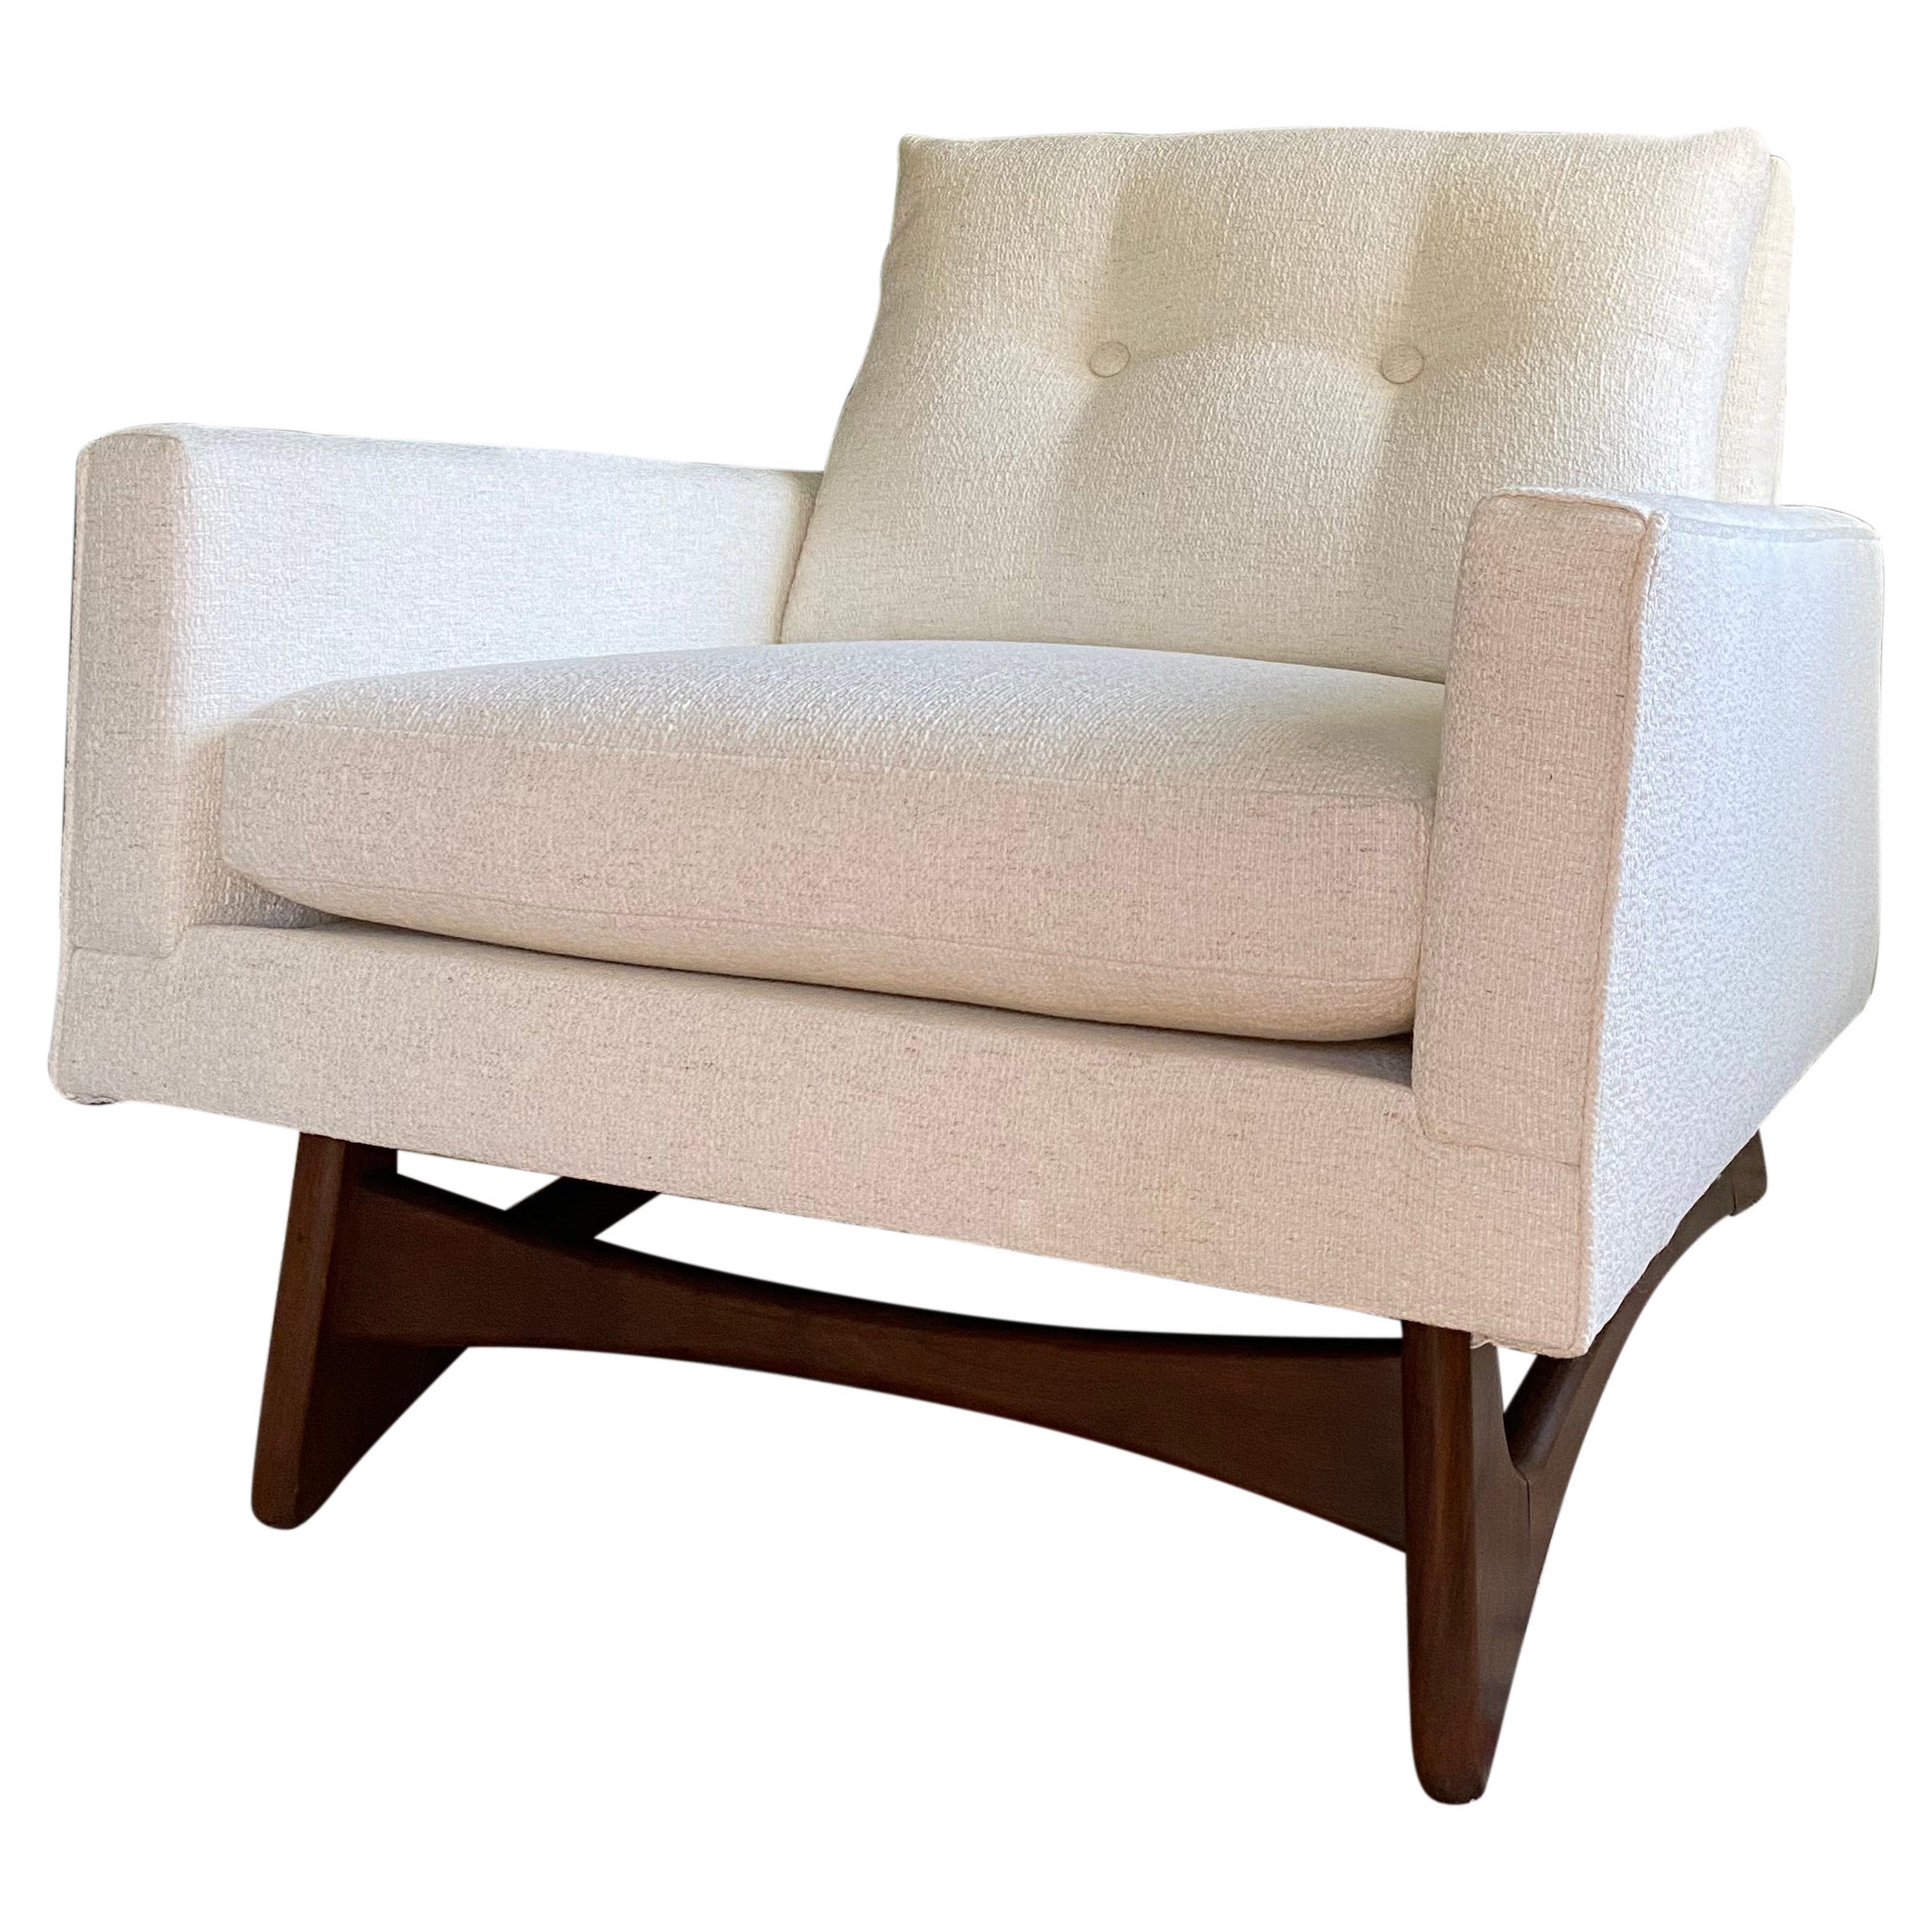 Reupholstered Adrian Pearsall Lounge Chair by Craft Associates, 2406 For Sale